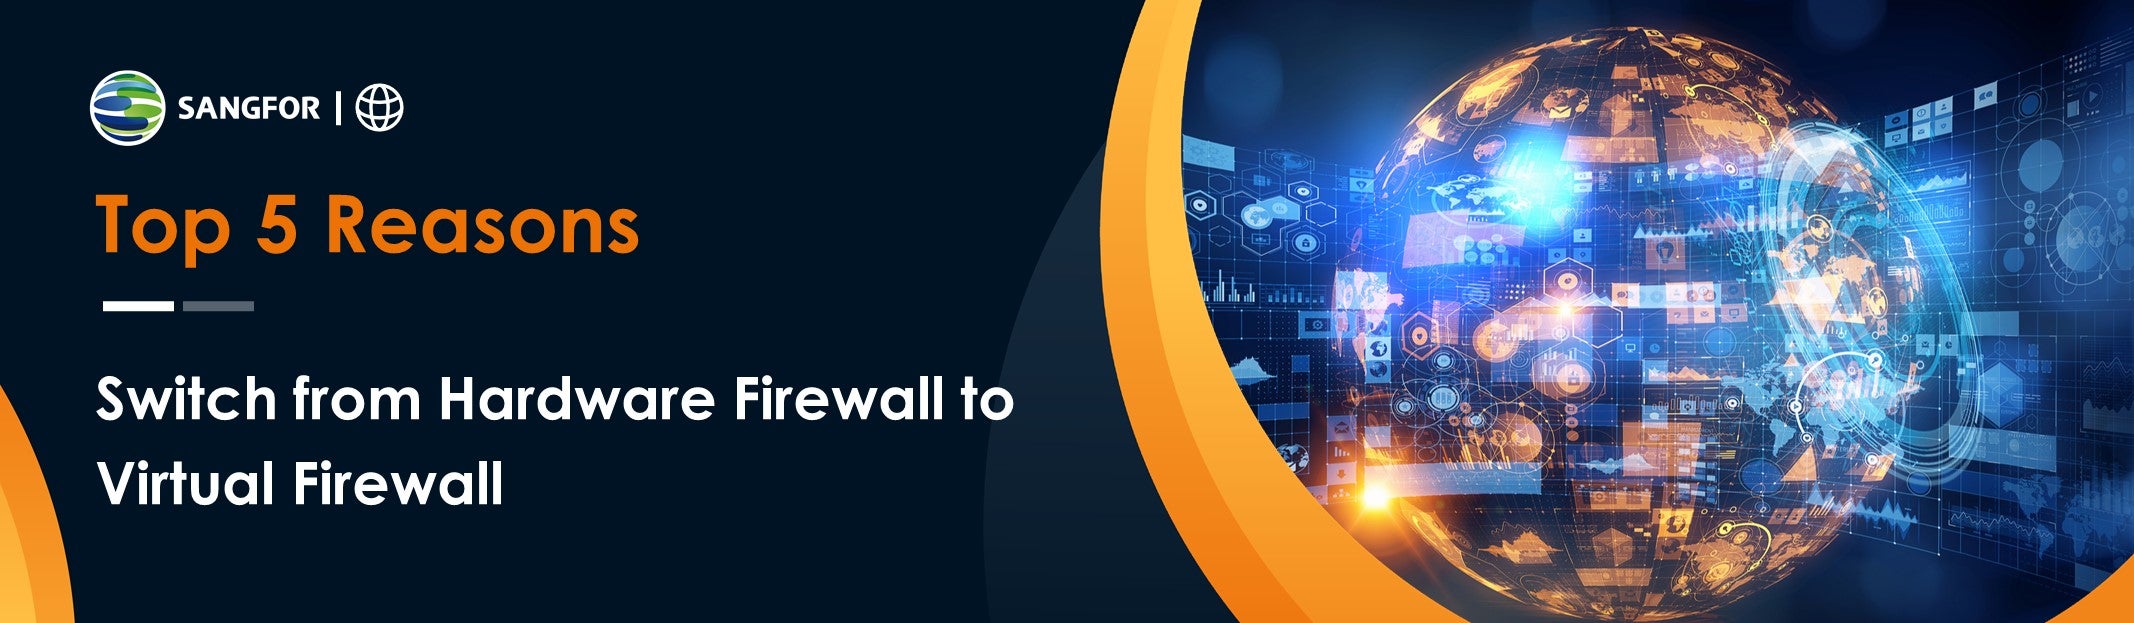 5 reasons to switch from hardware firewall to virtual firewall article